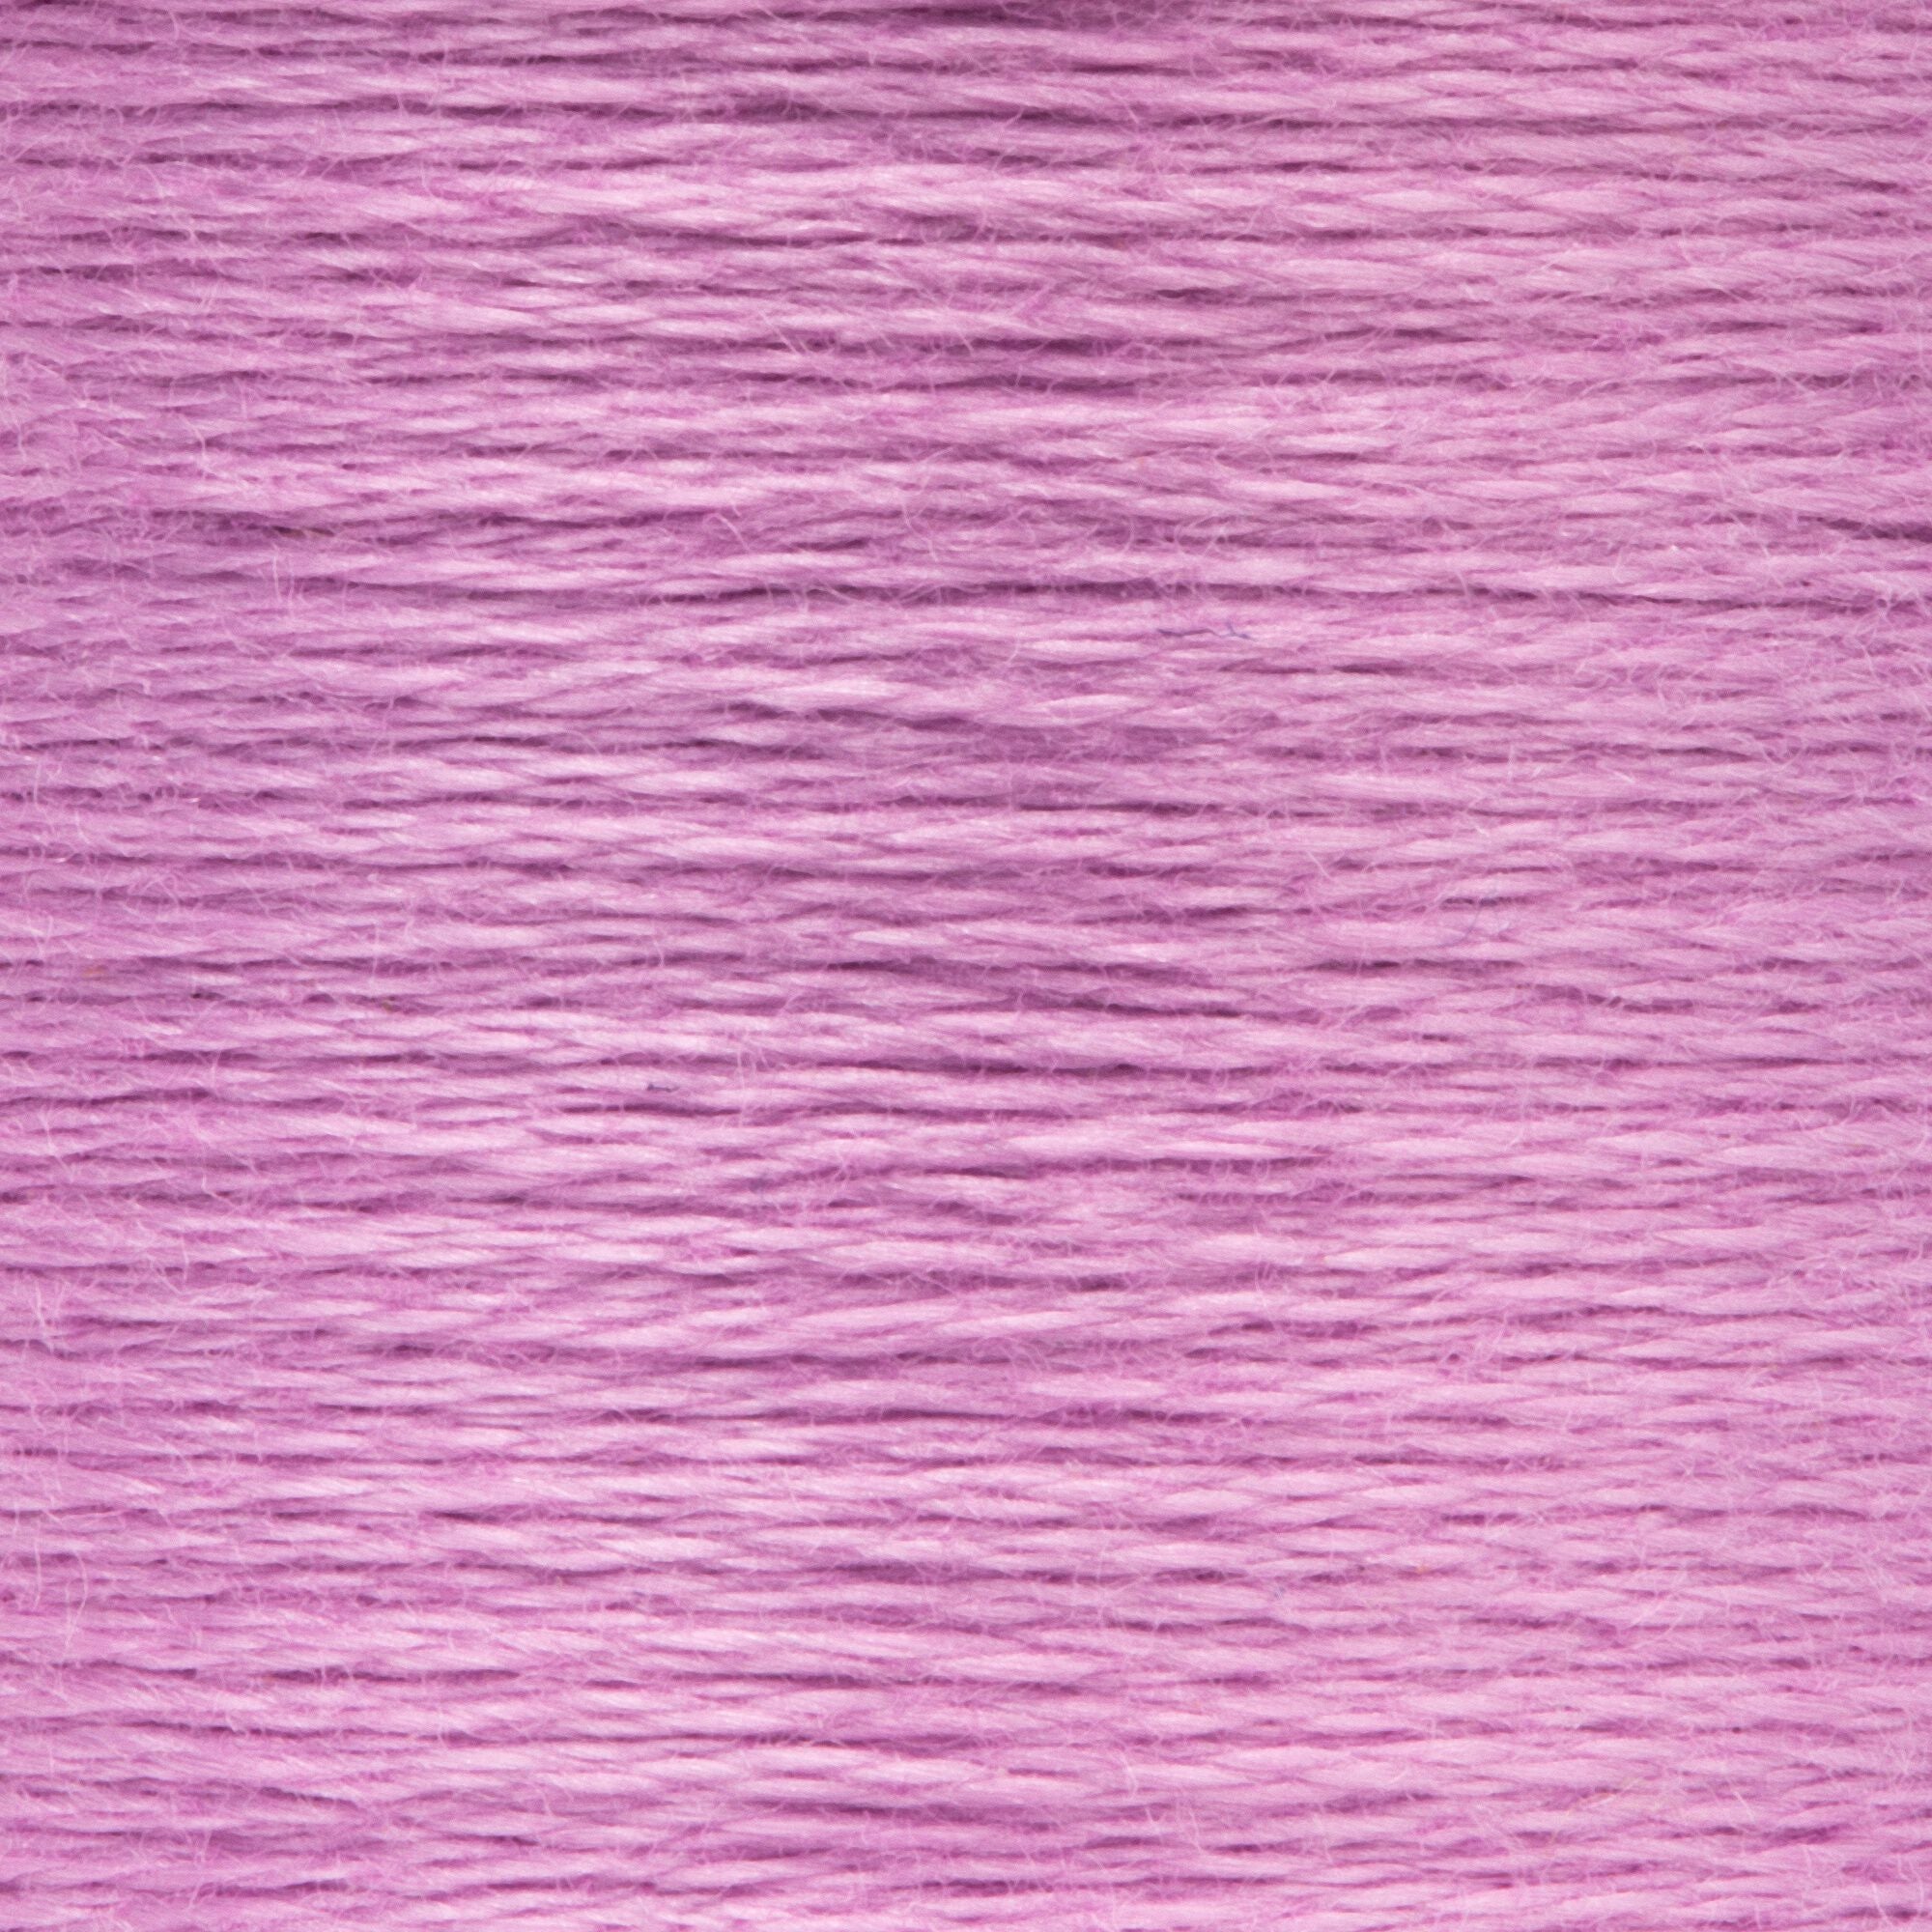 Anchor Embroidery Floss in Violet Lt